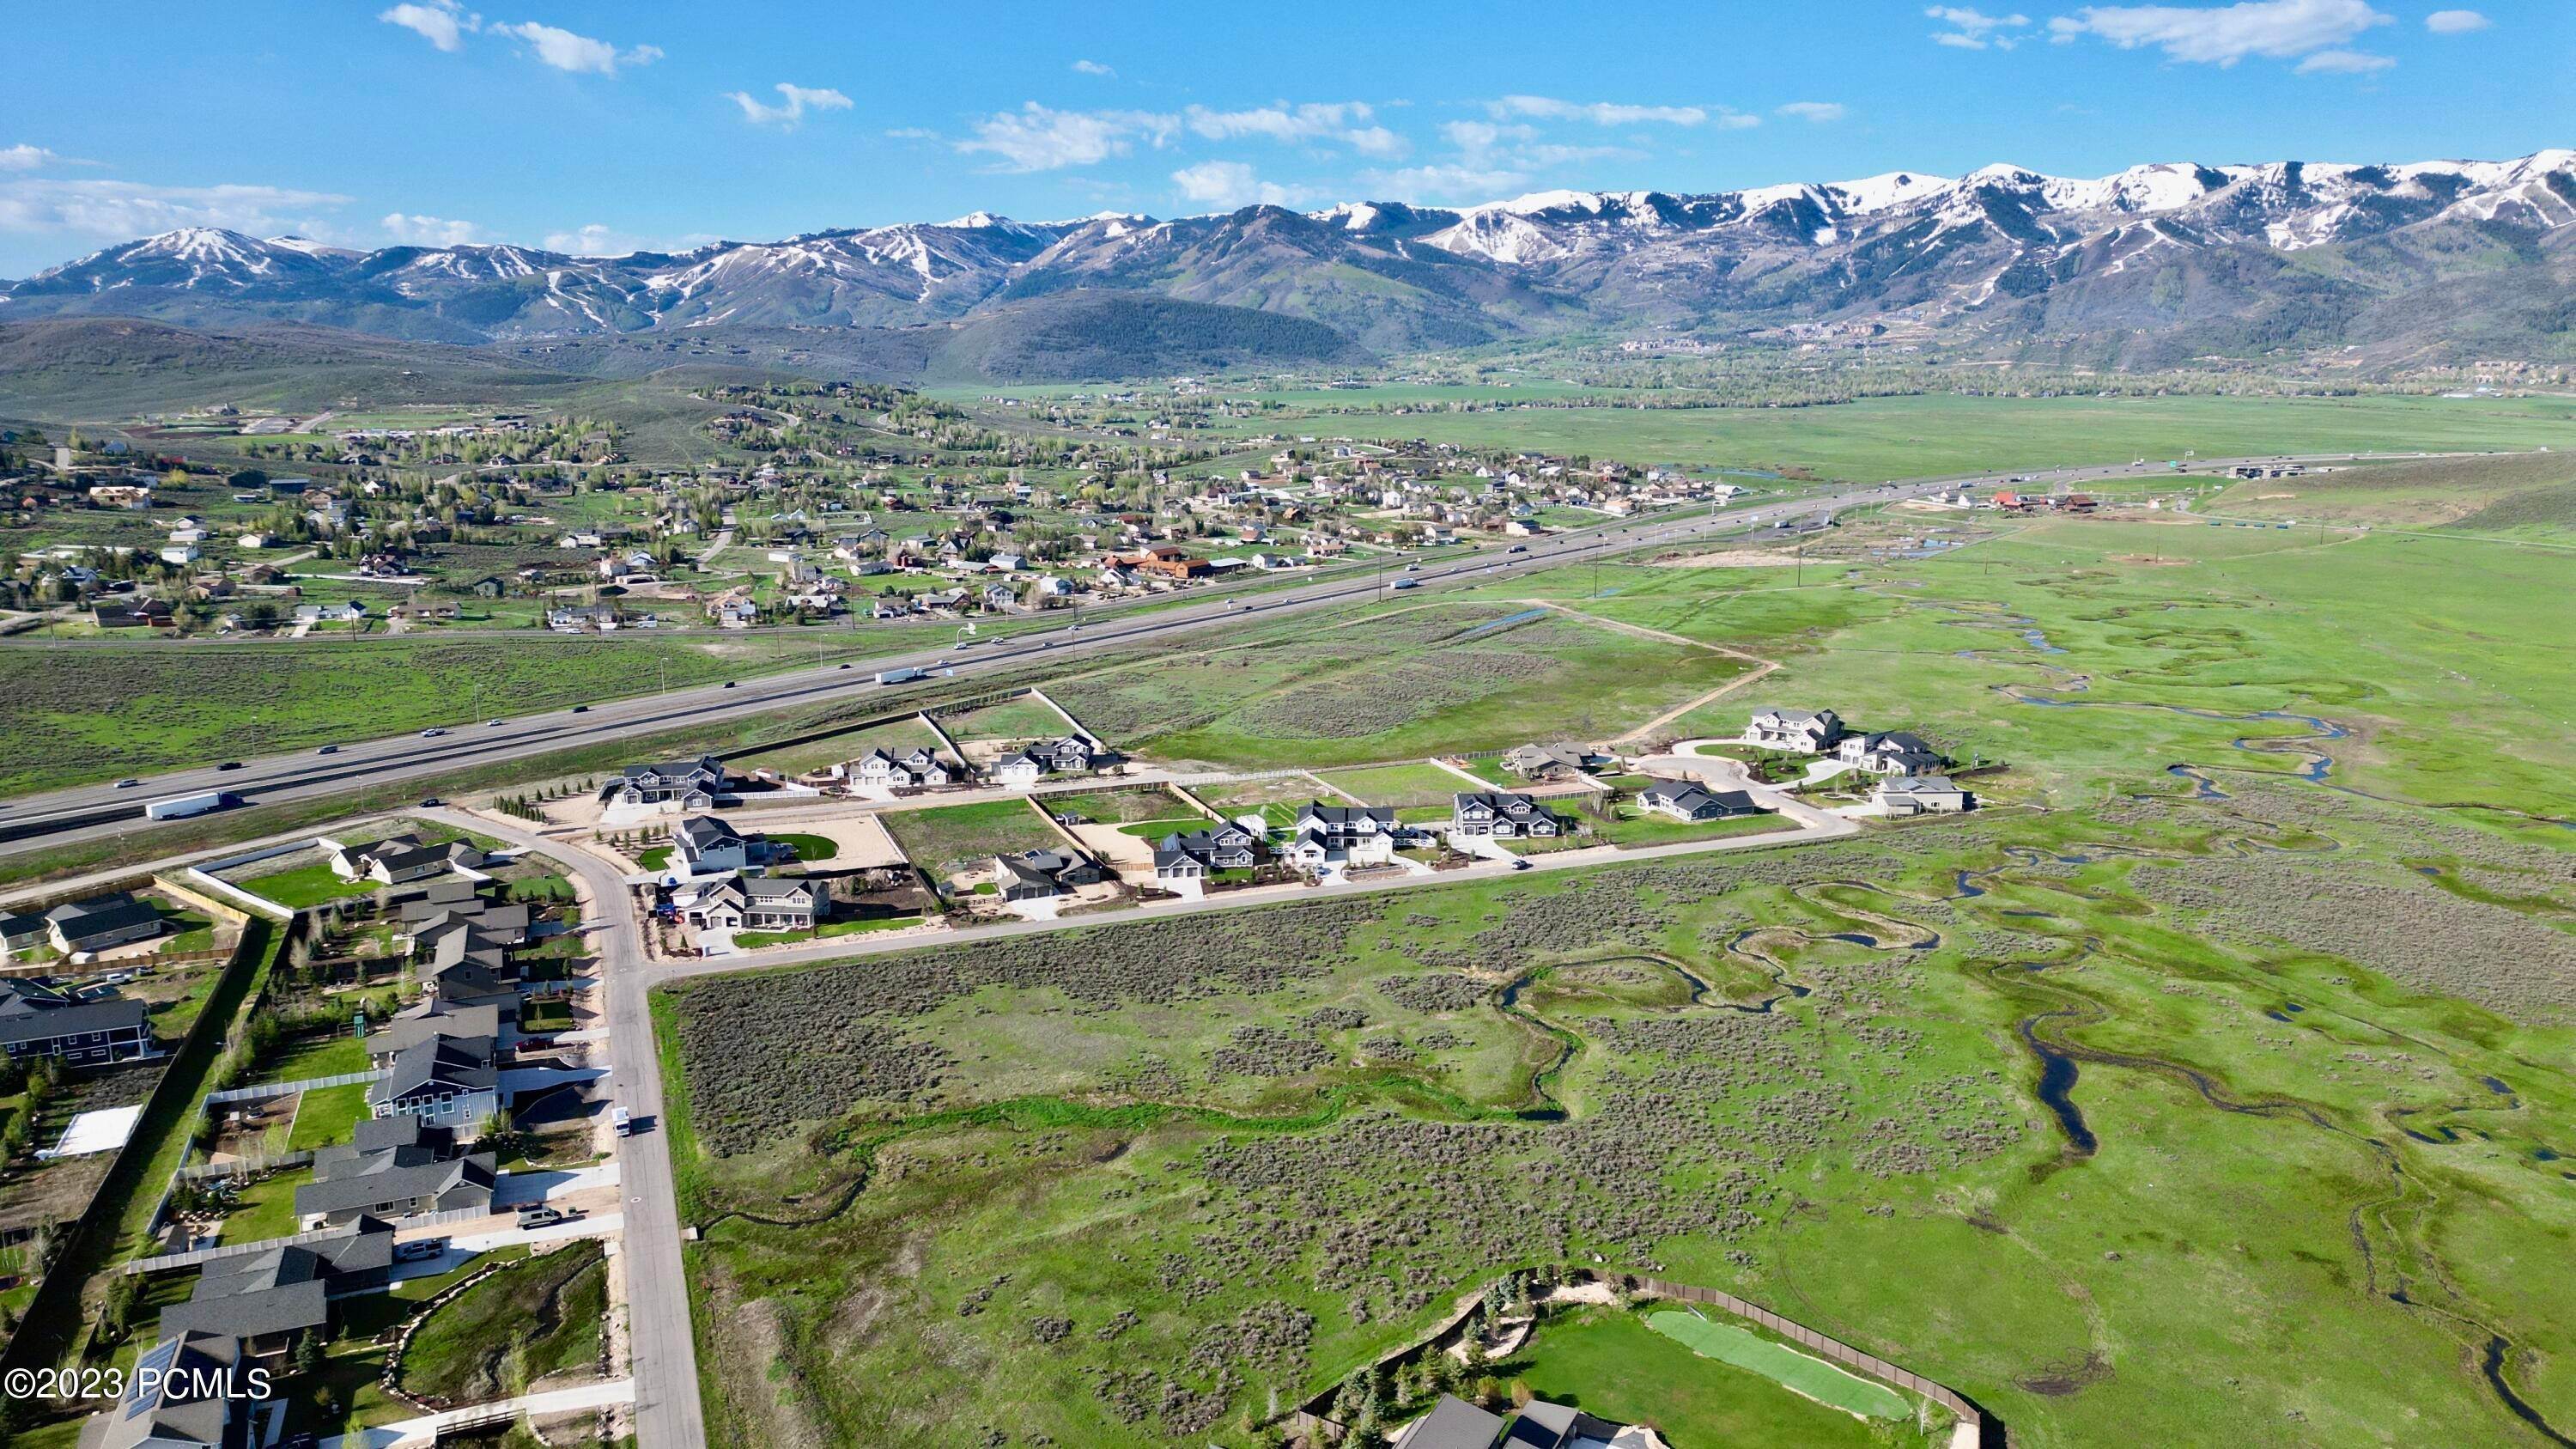 Residential Lots & Land for Sale at 6959 N Greenfield Drive Park City, Utah 84098 United States